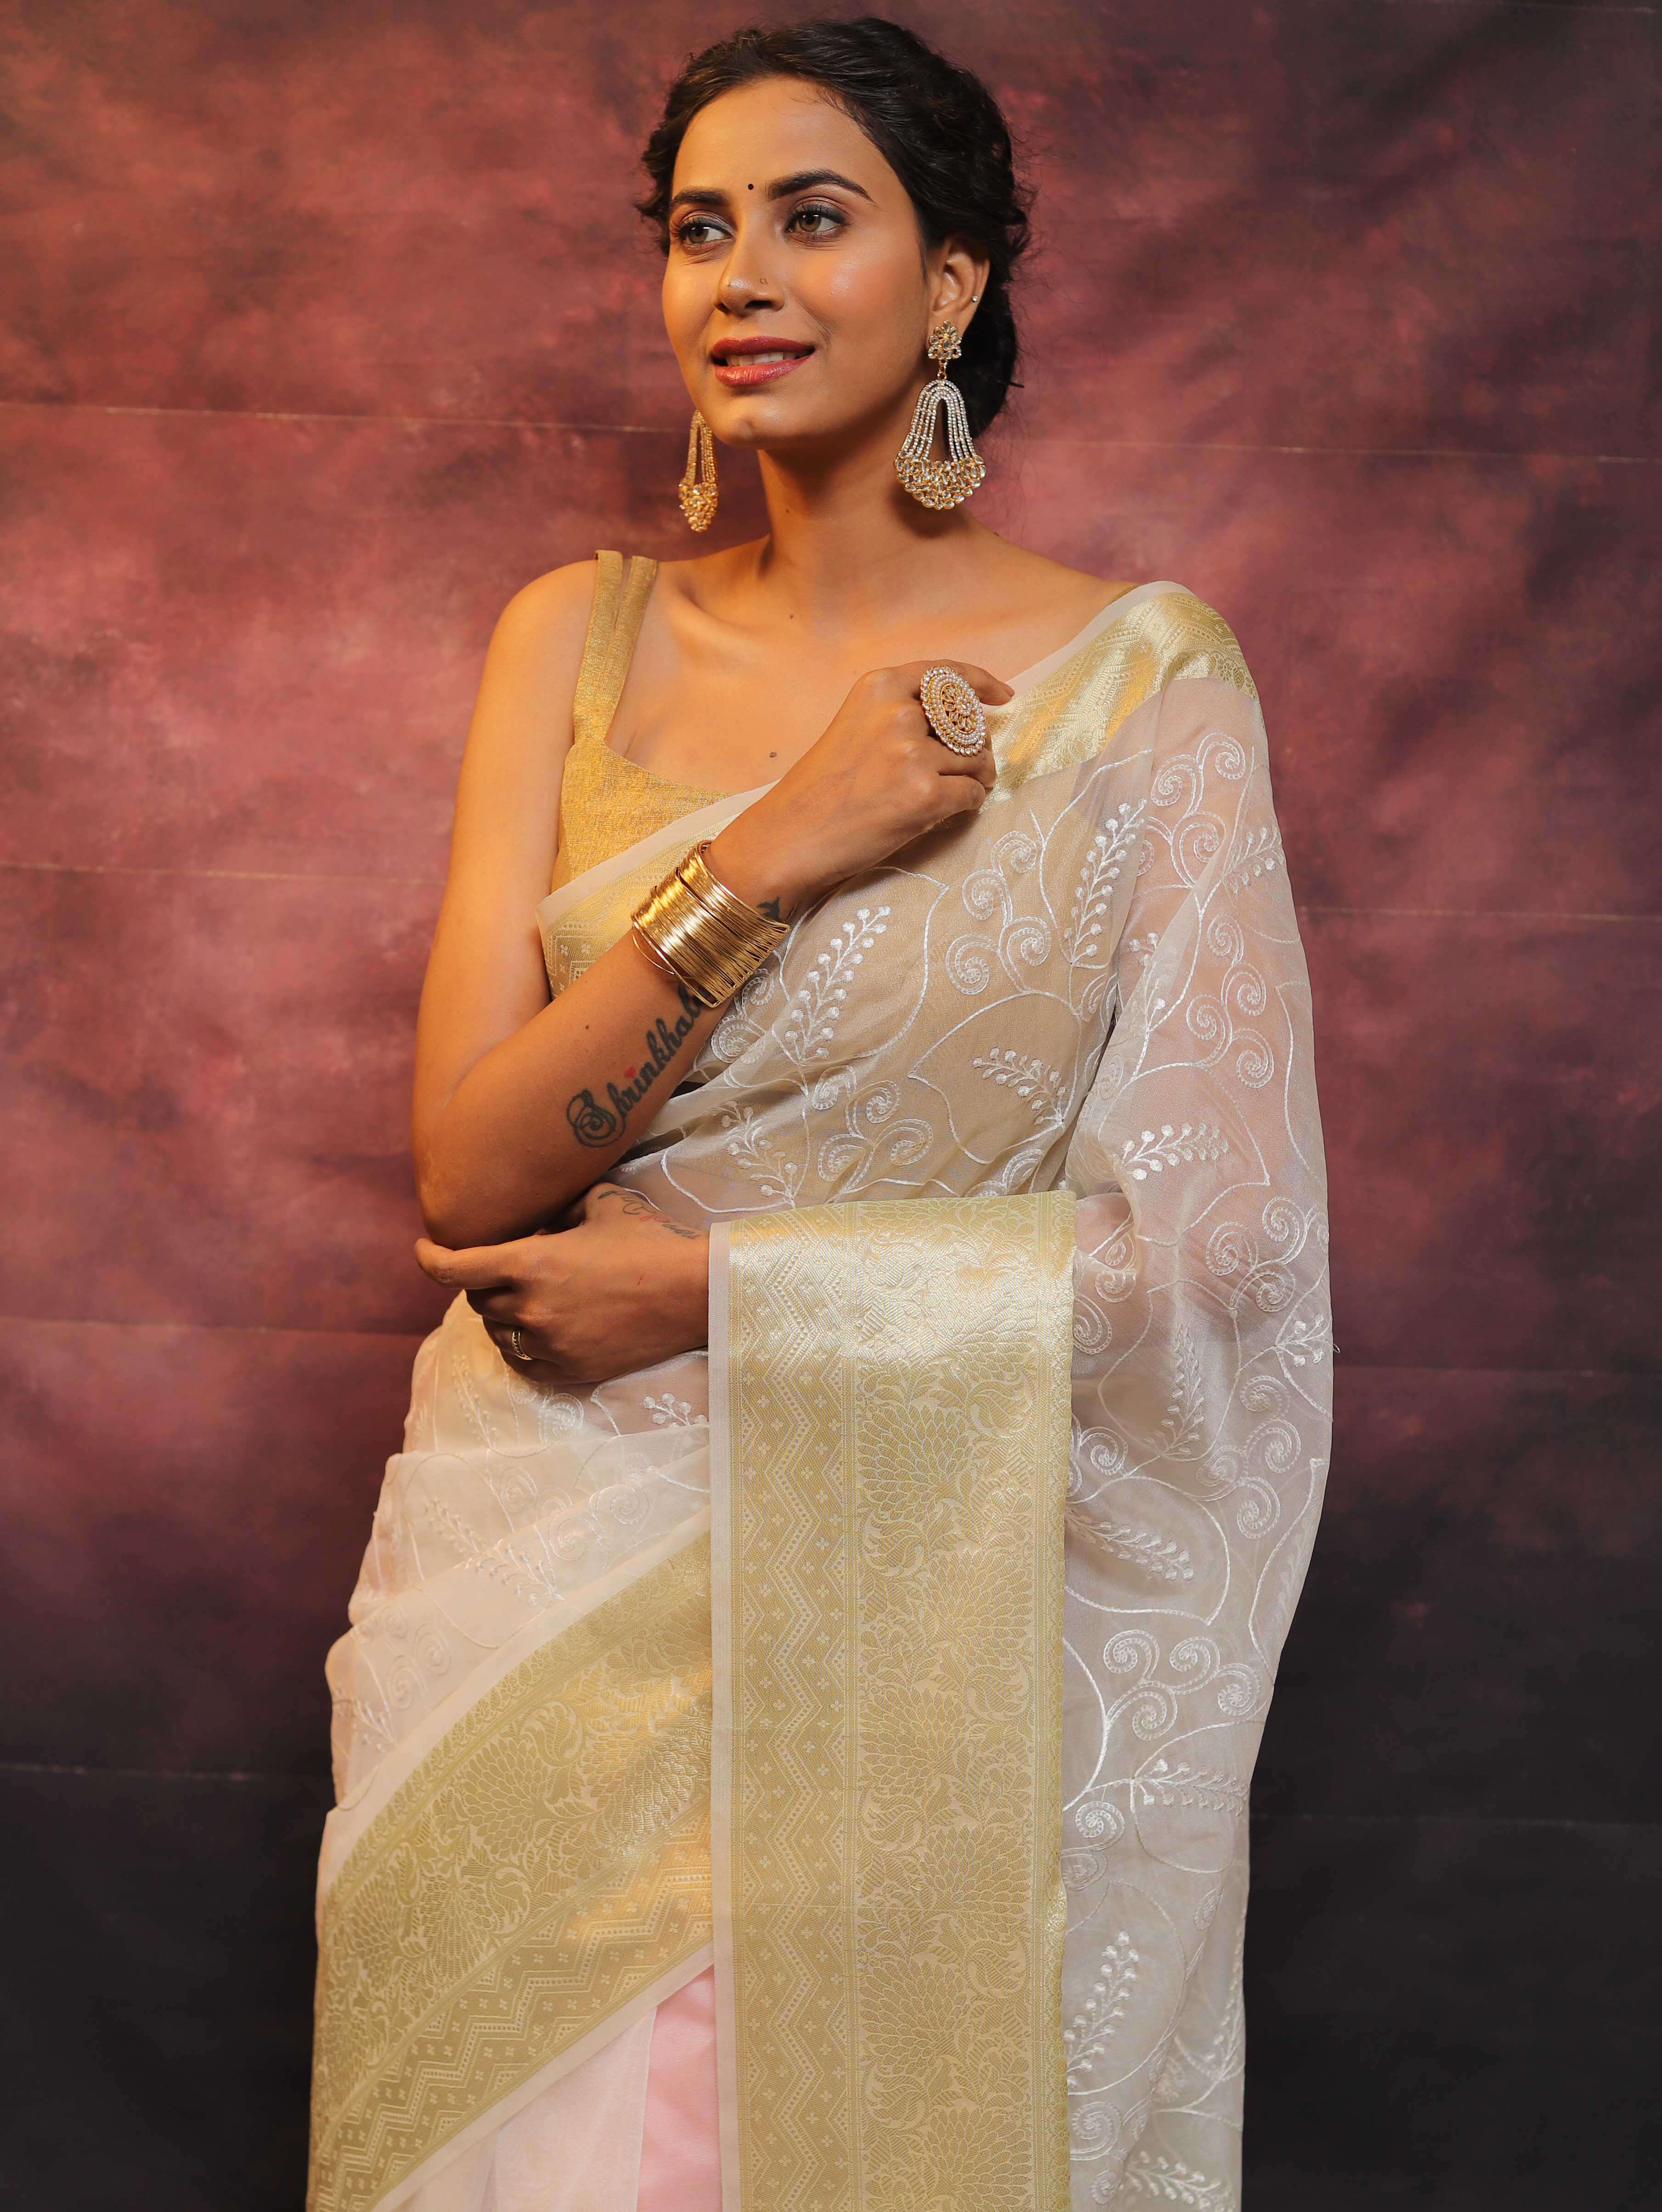 Banarasee Handwoven Broad Border Organza Saree With Embroidered Floral Design-White